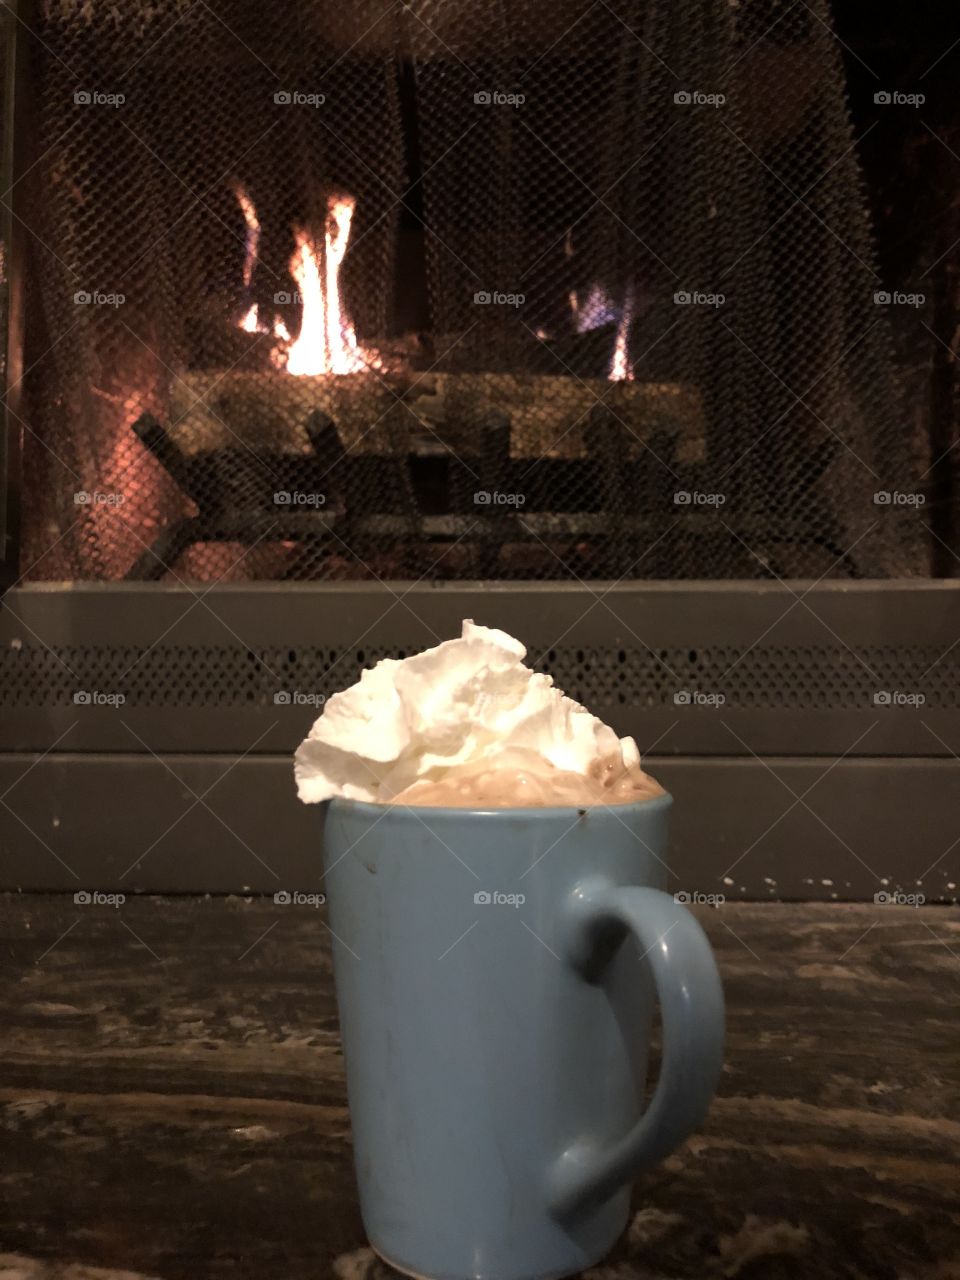 A peaceful evening with hot chocolate and fireplace warmth